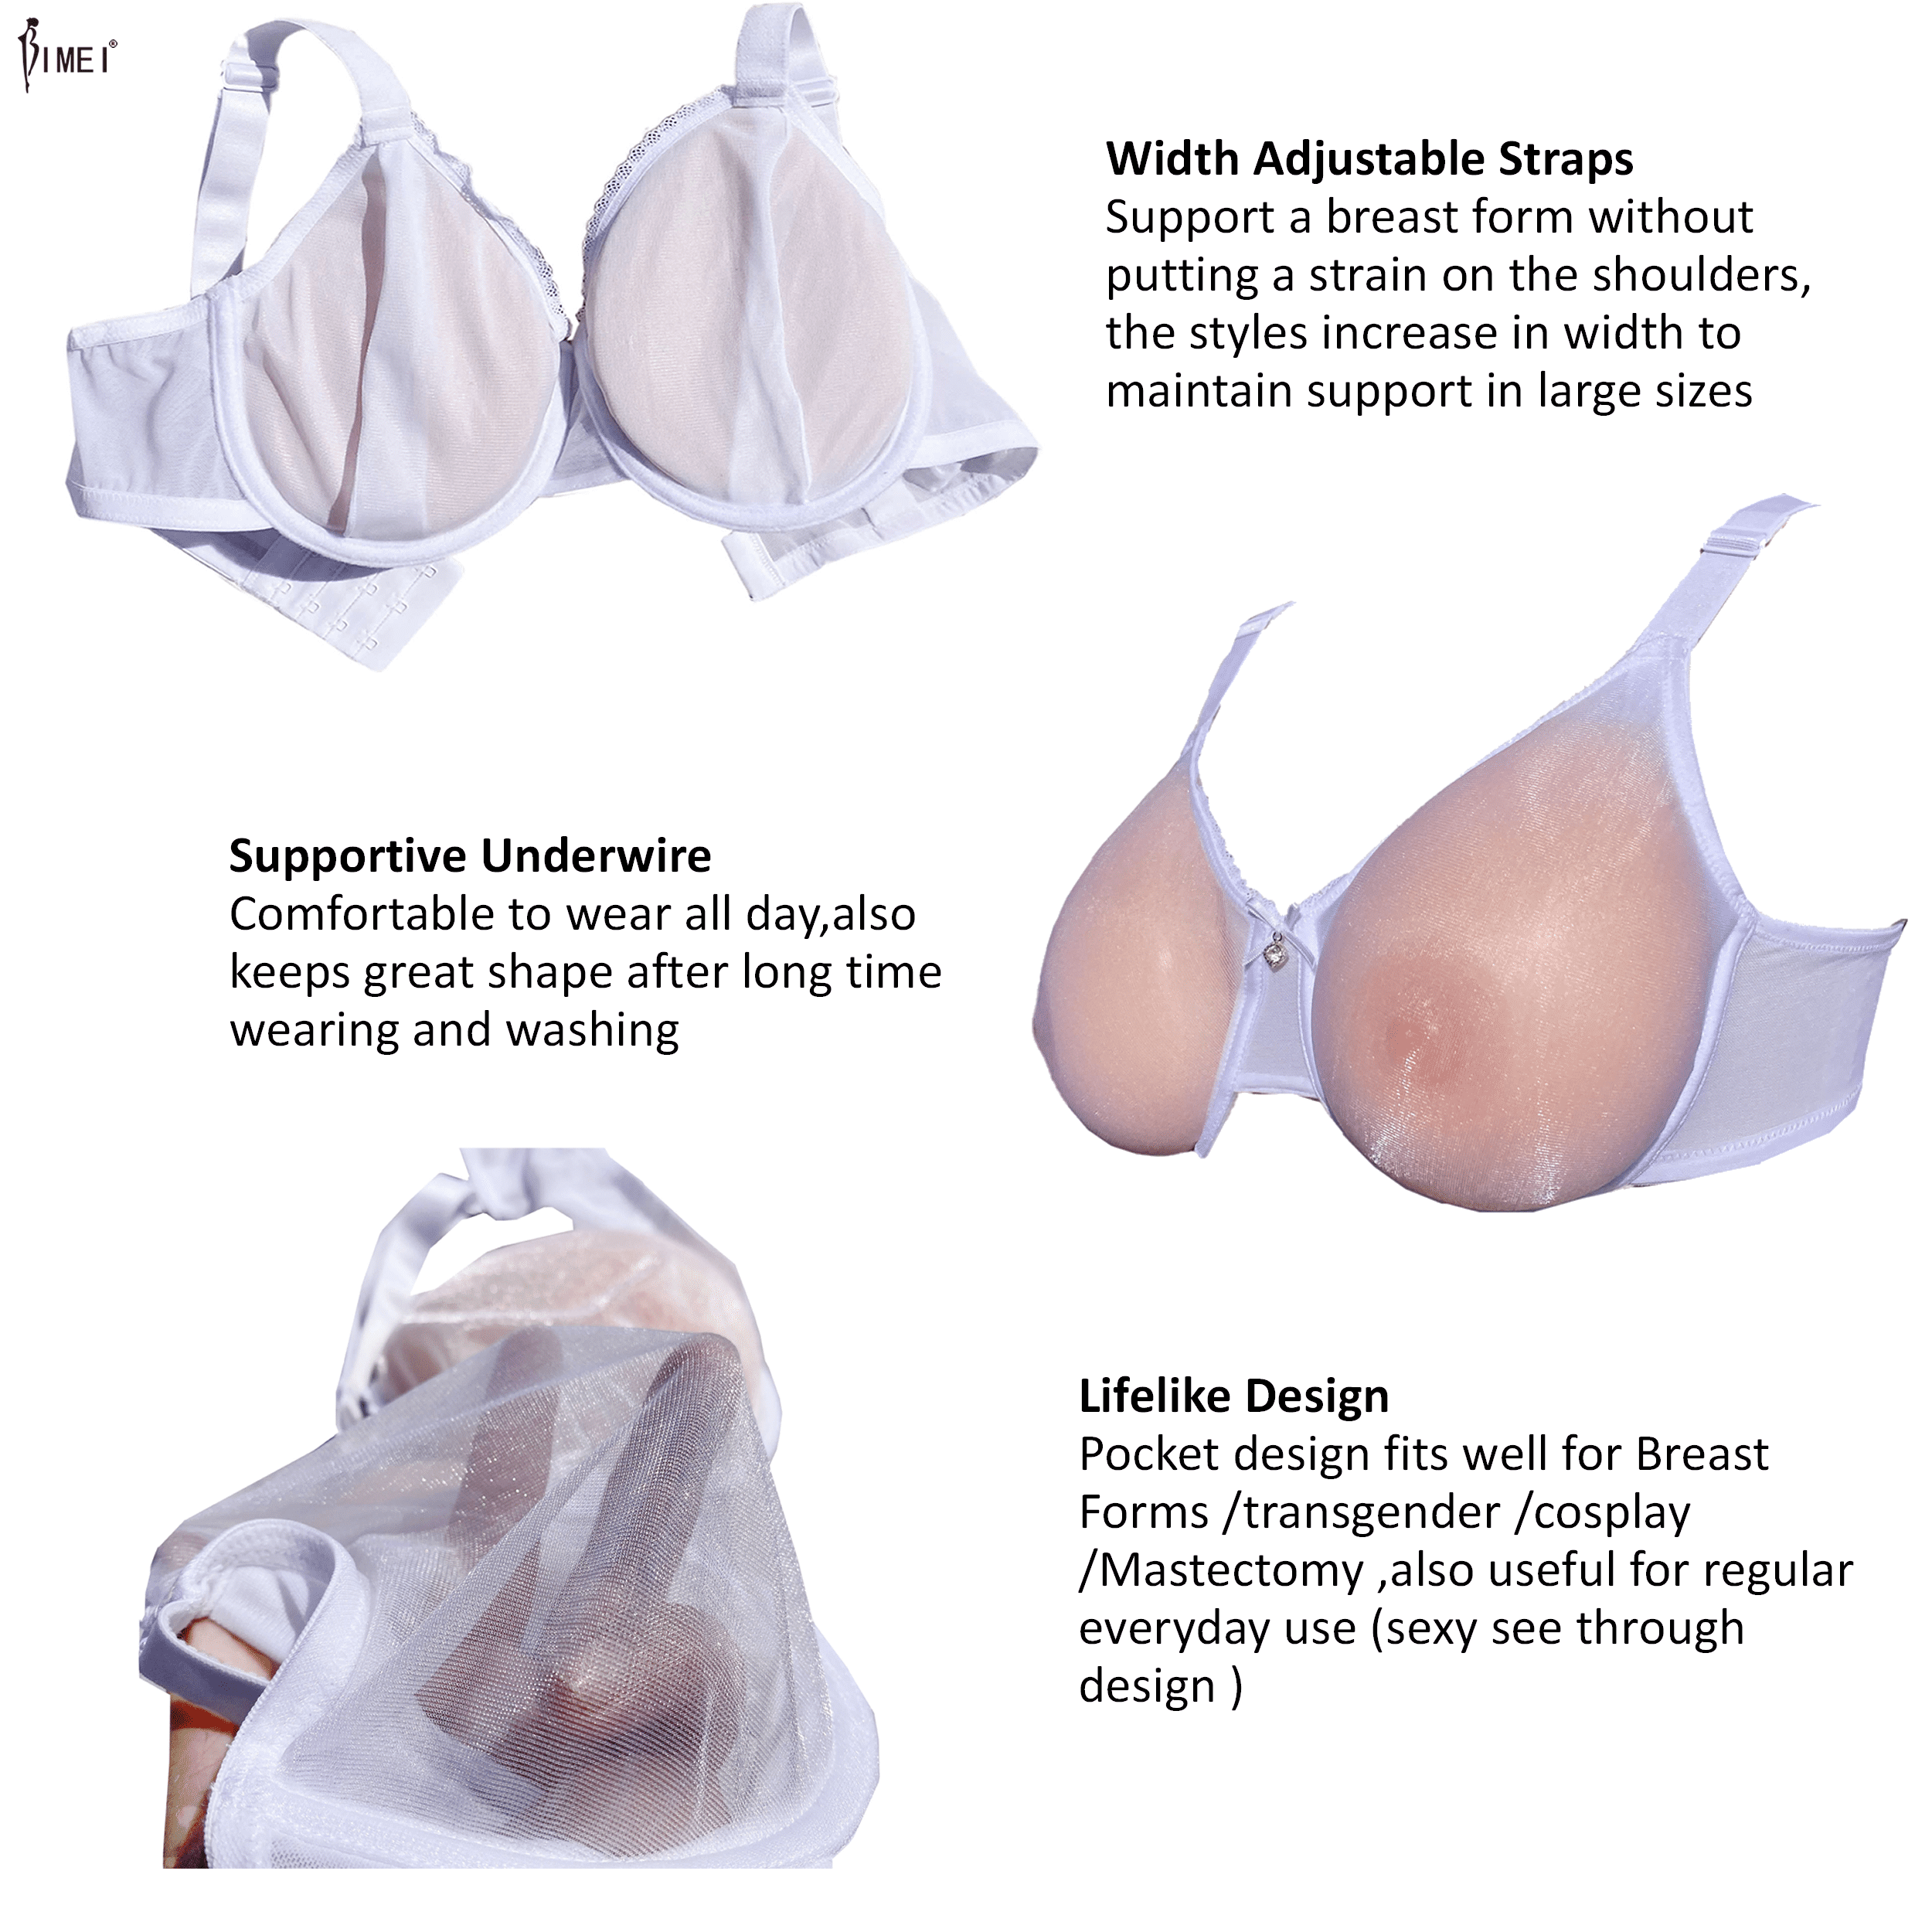 BIMEI See Through Bra CD Mastectomy Lingerie Bra Silicone Breast Forms  Prosthesis Pocket Bra with Steel Ring 9008,White,40B 